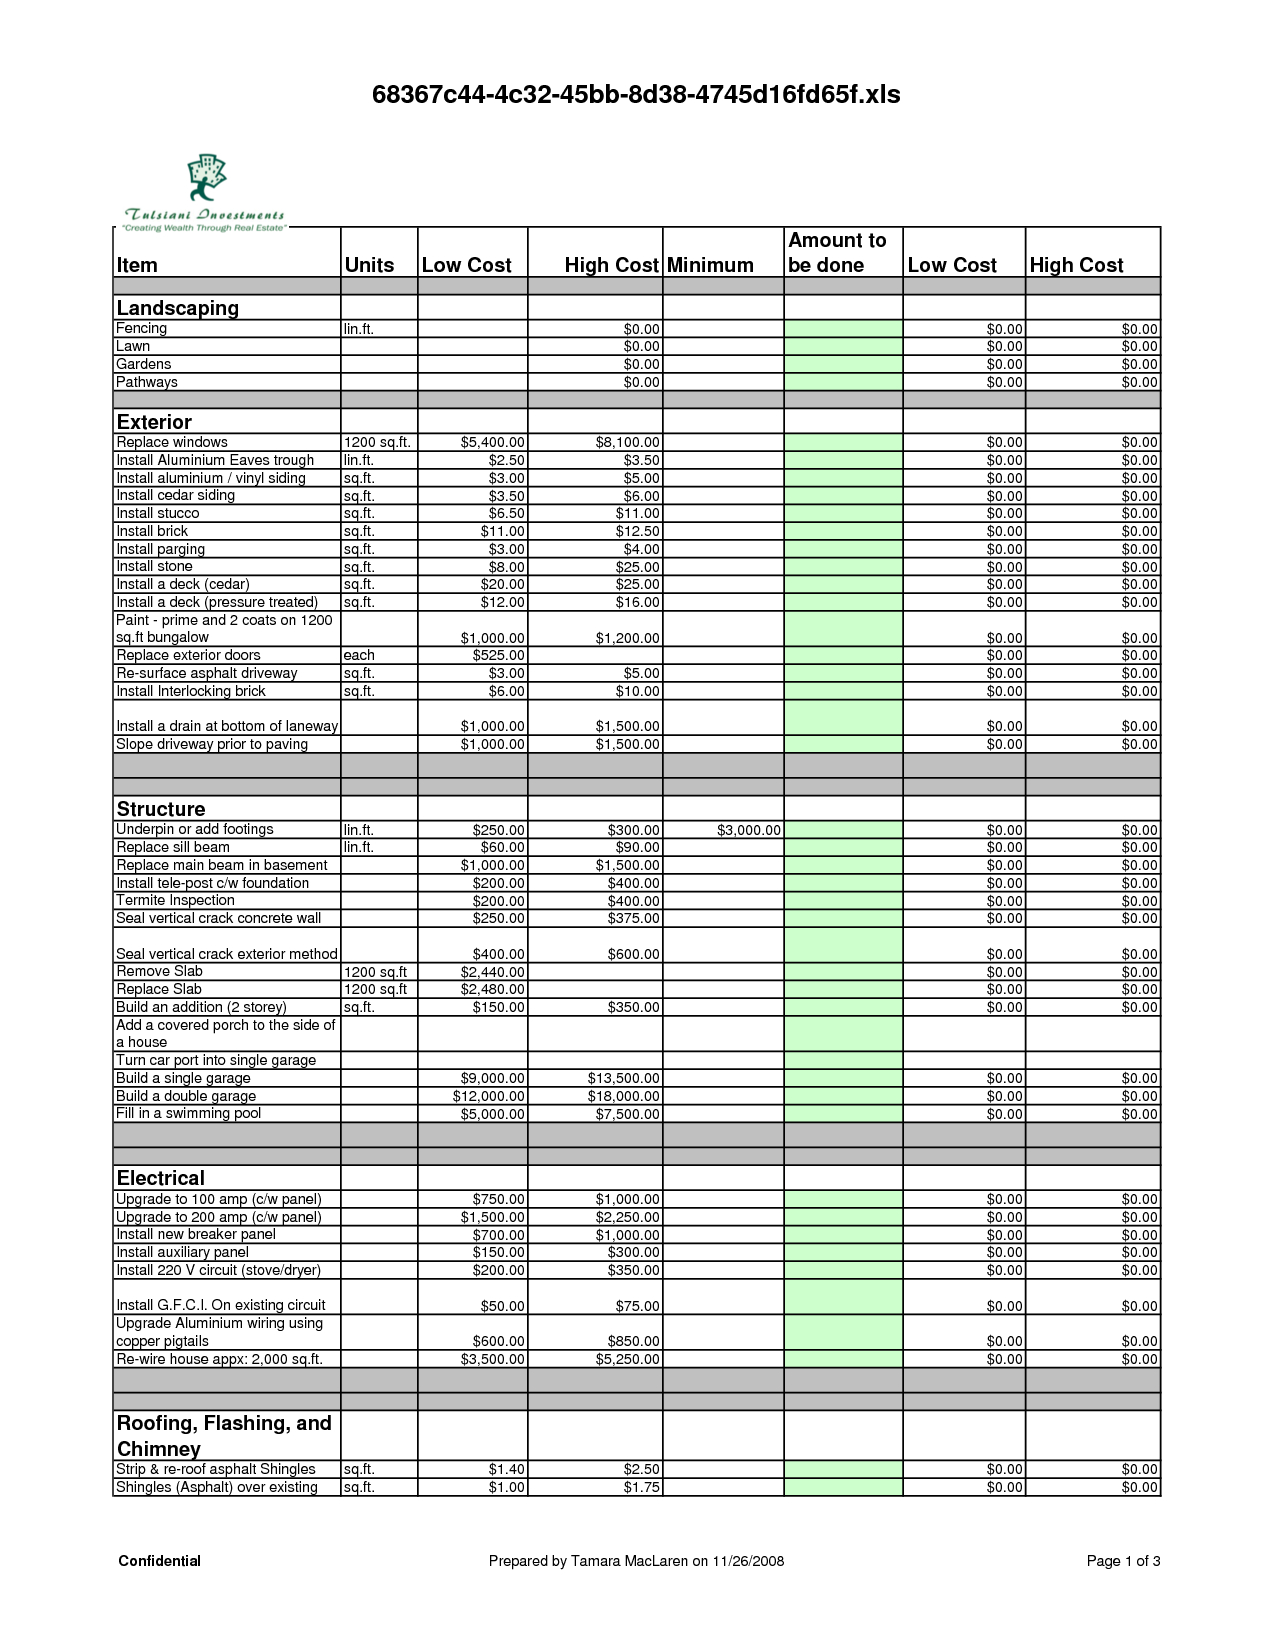 Download Free Construction Estimate Template Excel Free Construction